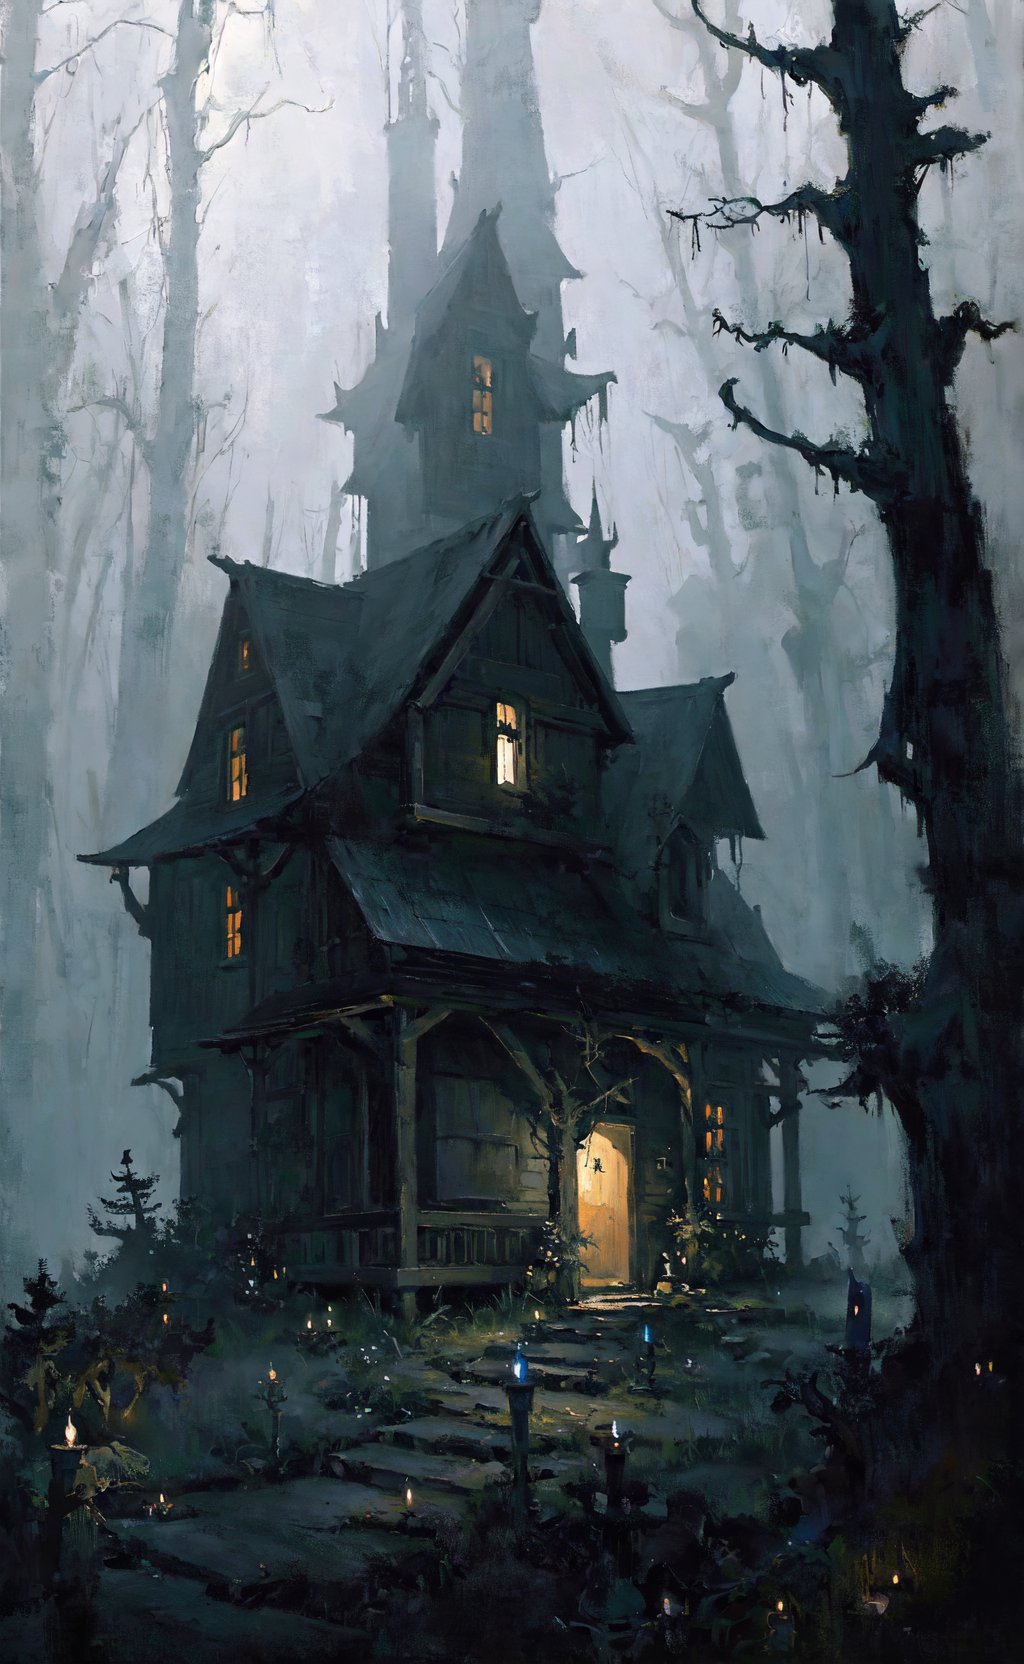 masterpiece, best quality, beautiful oil painting illustration, eerie witch cottage deep in a magical forest, dark, moody, mysterious